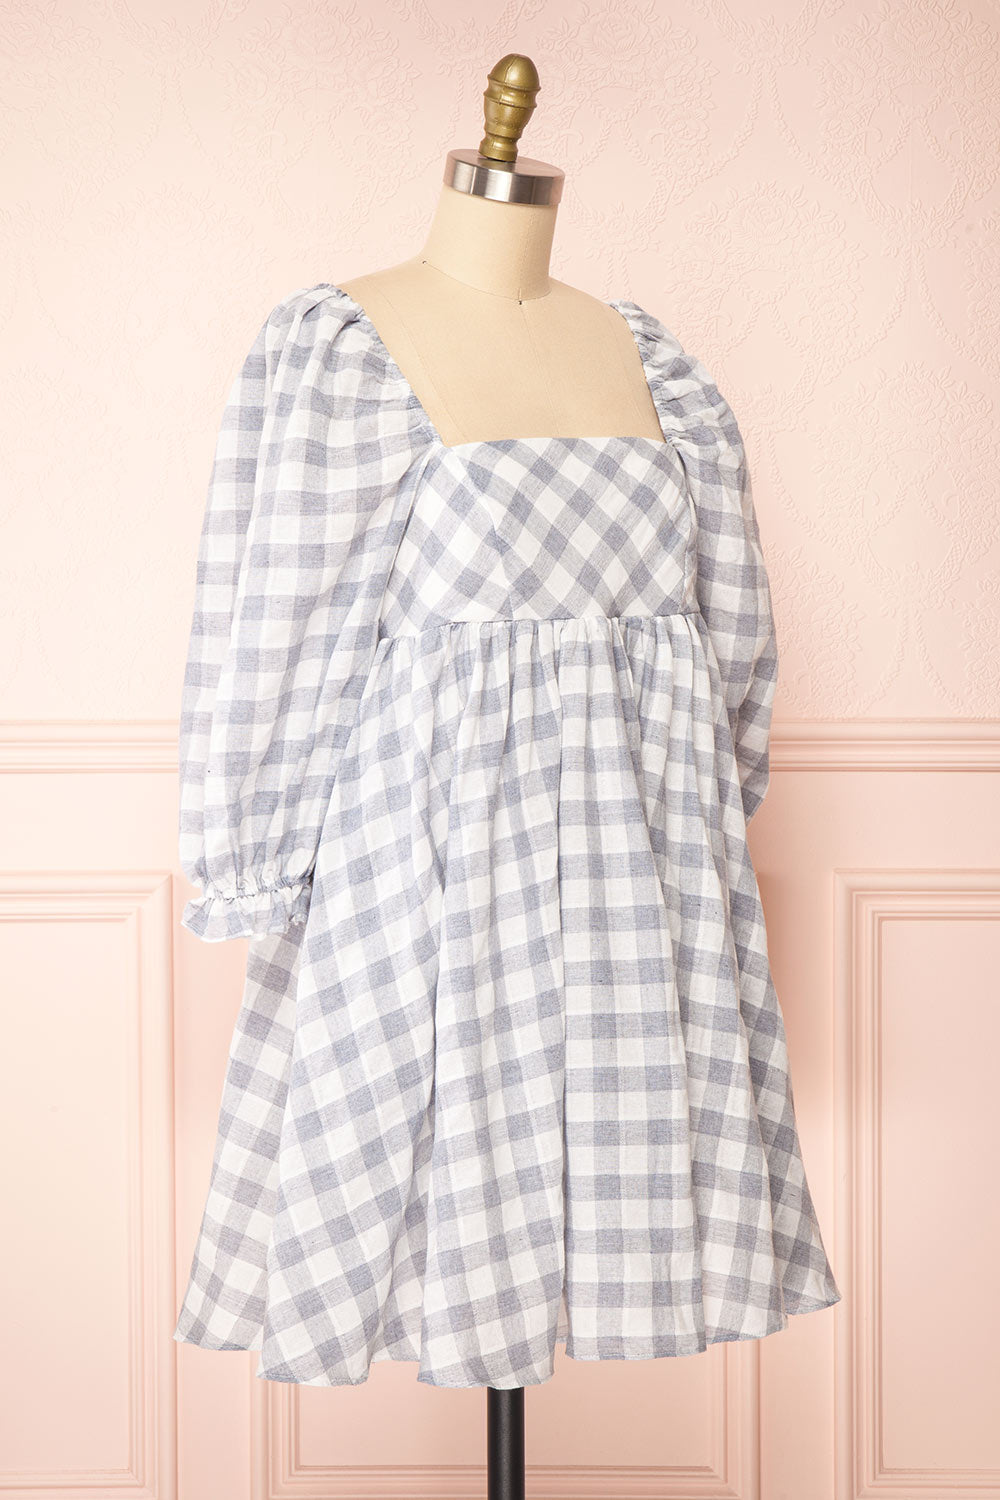 Conie Blue | Puffed Sleeves Short Checkered Dress side view 